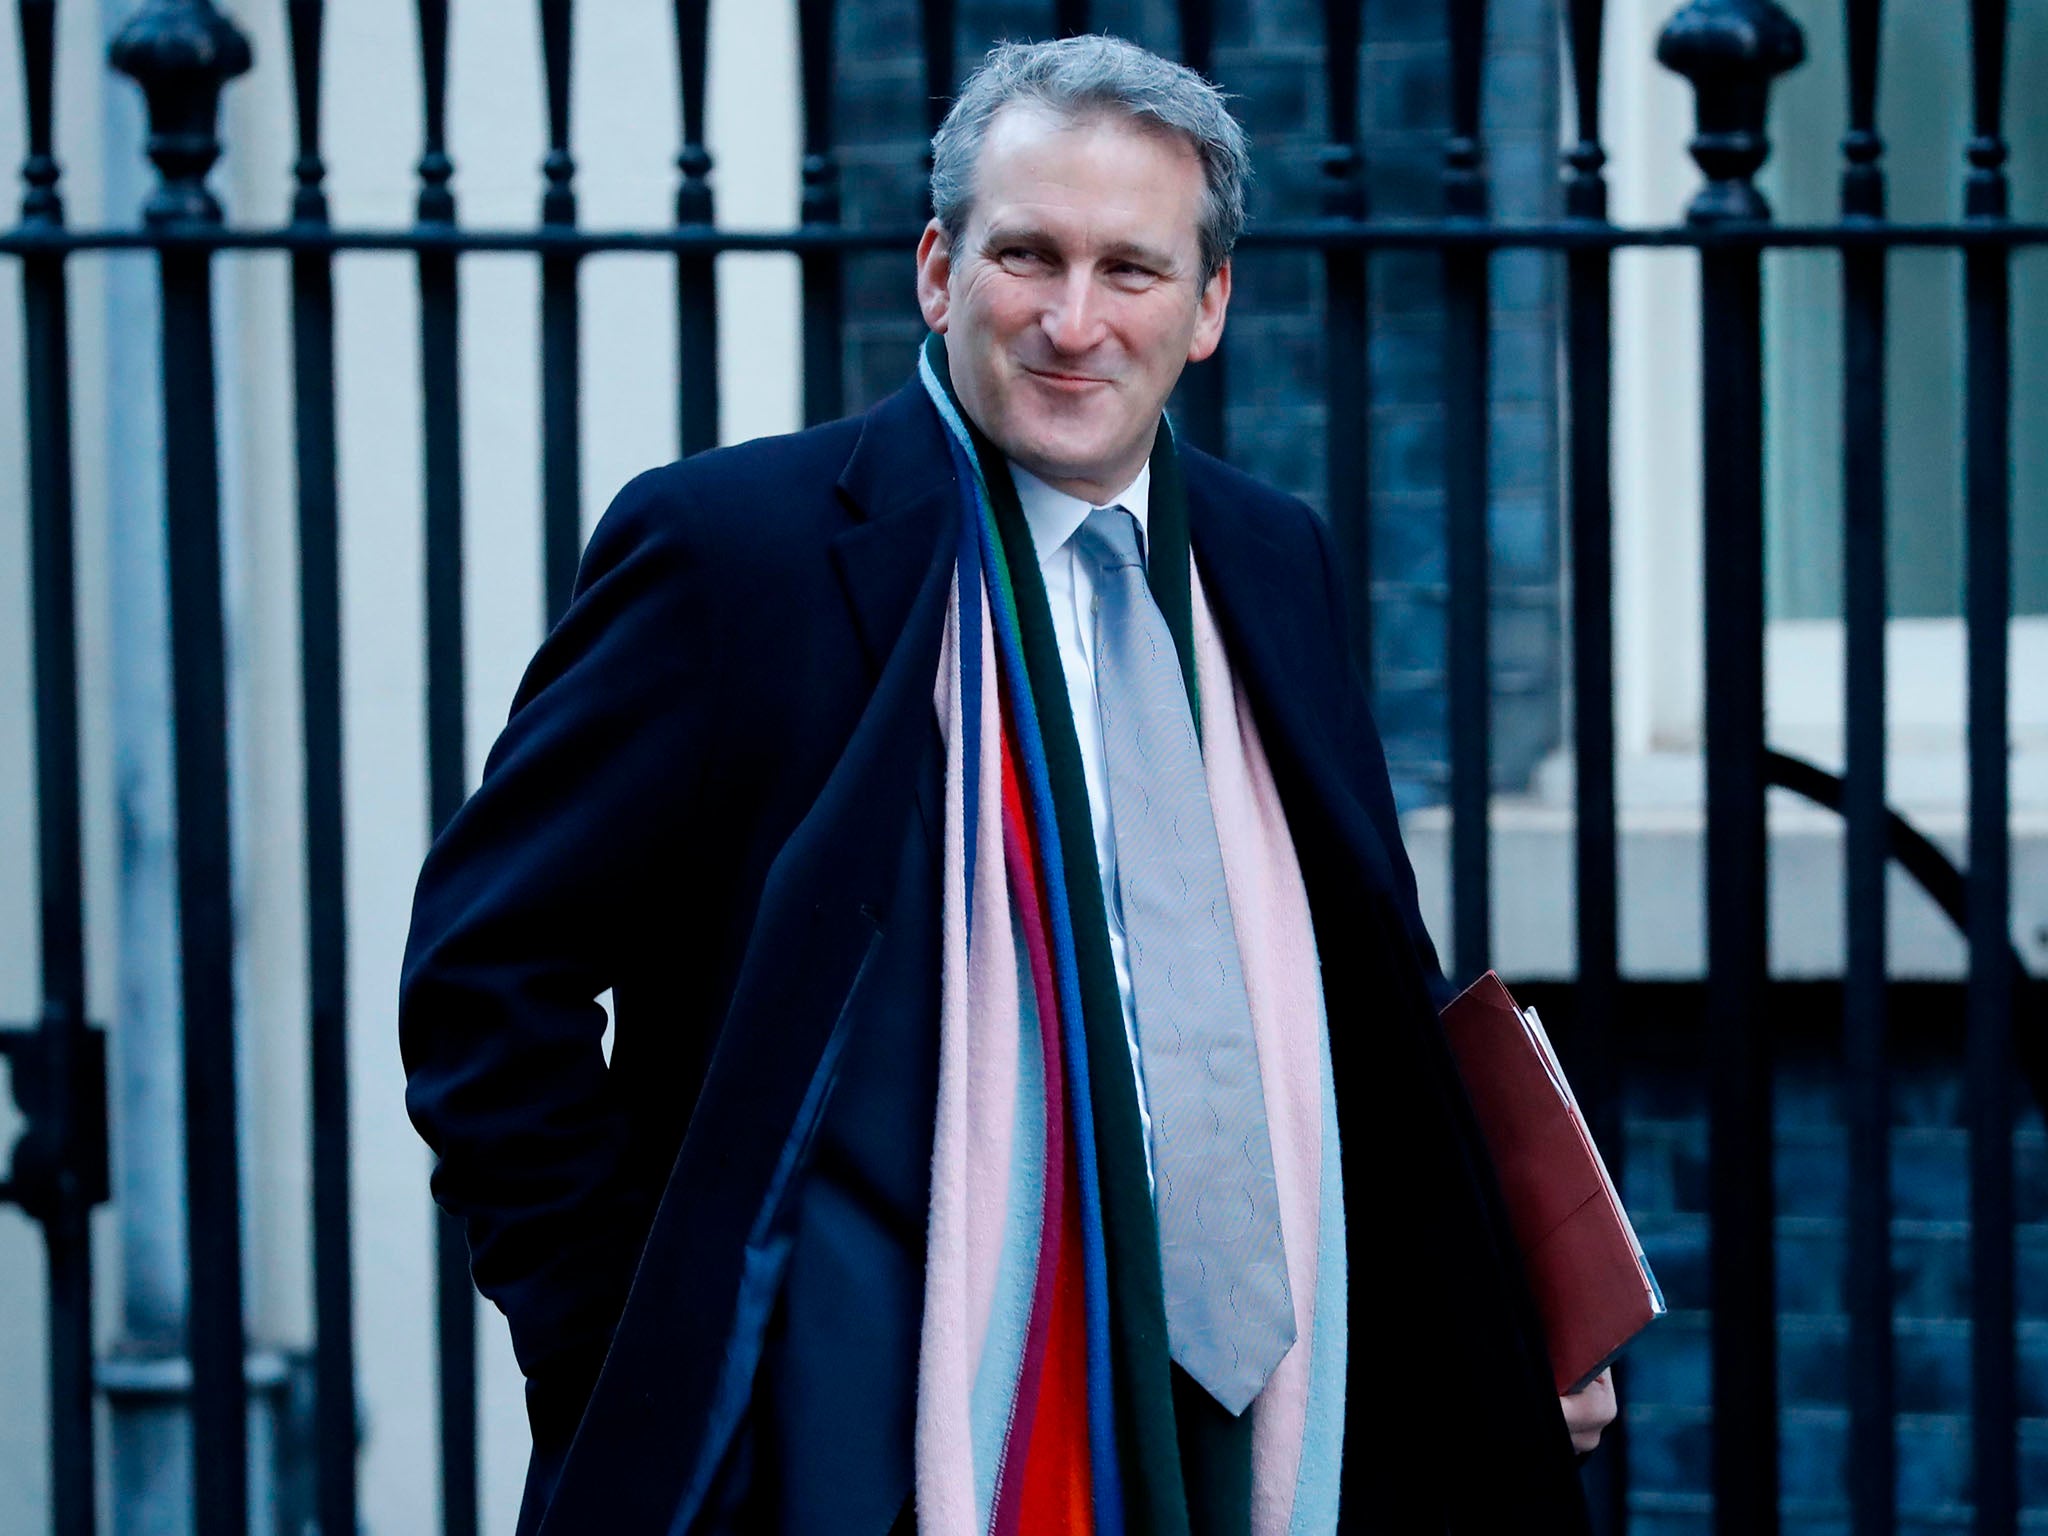 Damian Hinds, the education secretary, said exclusions must be used as a last resort